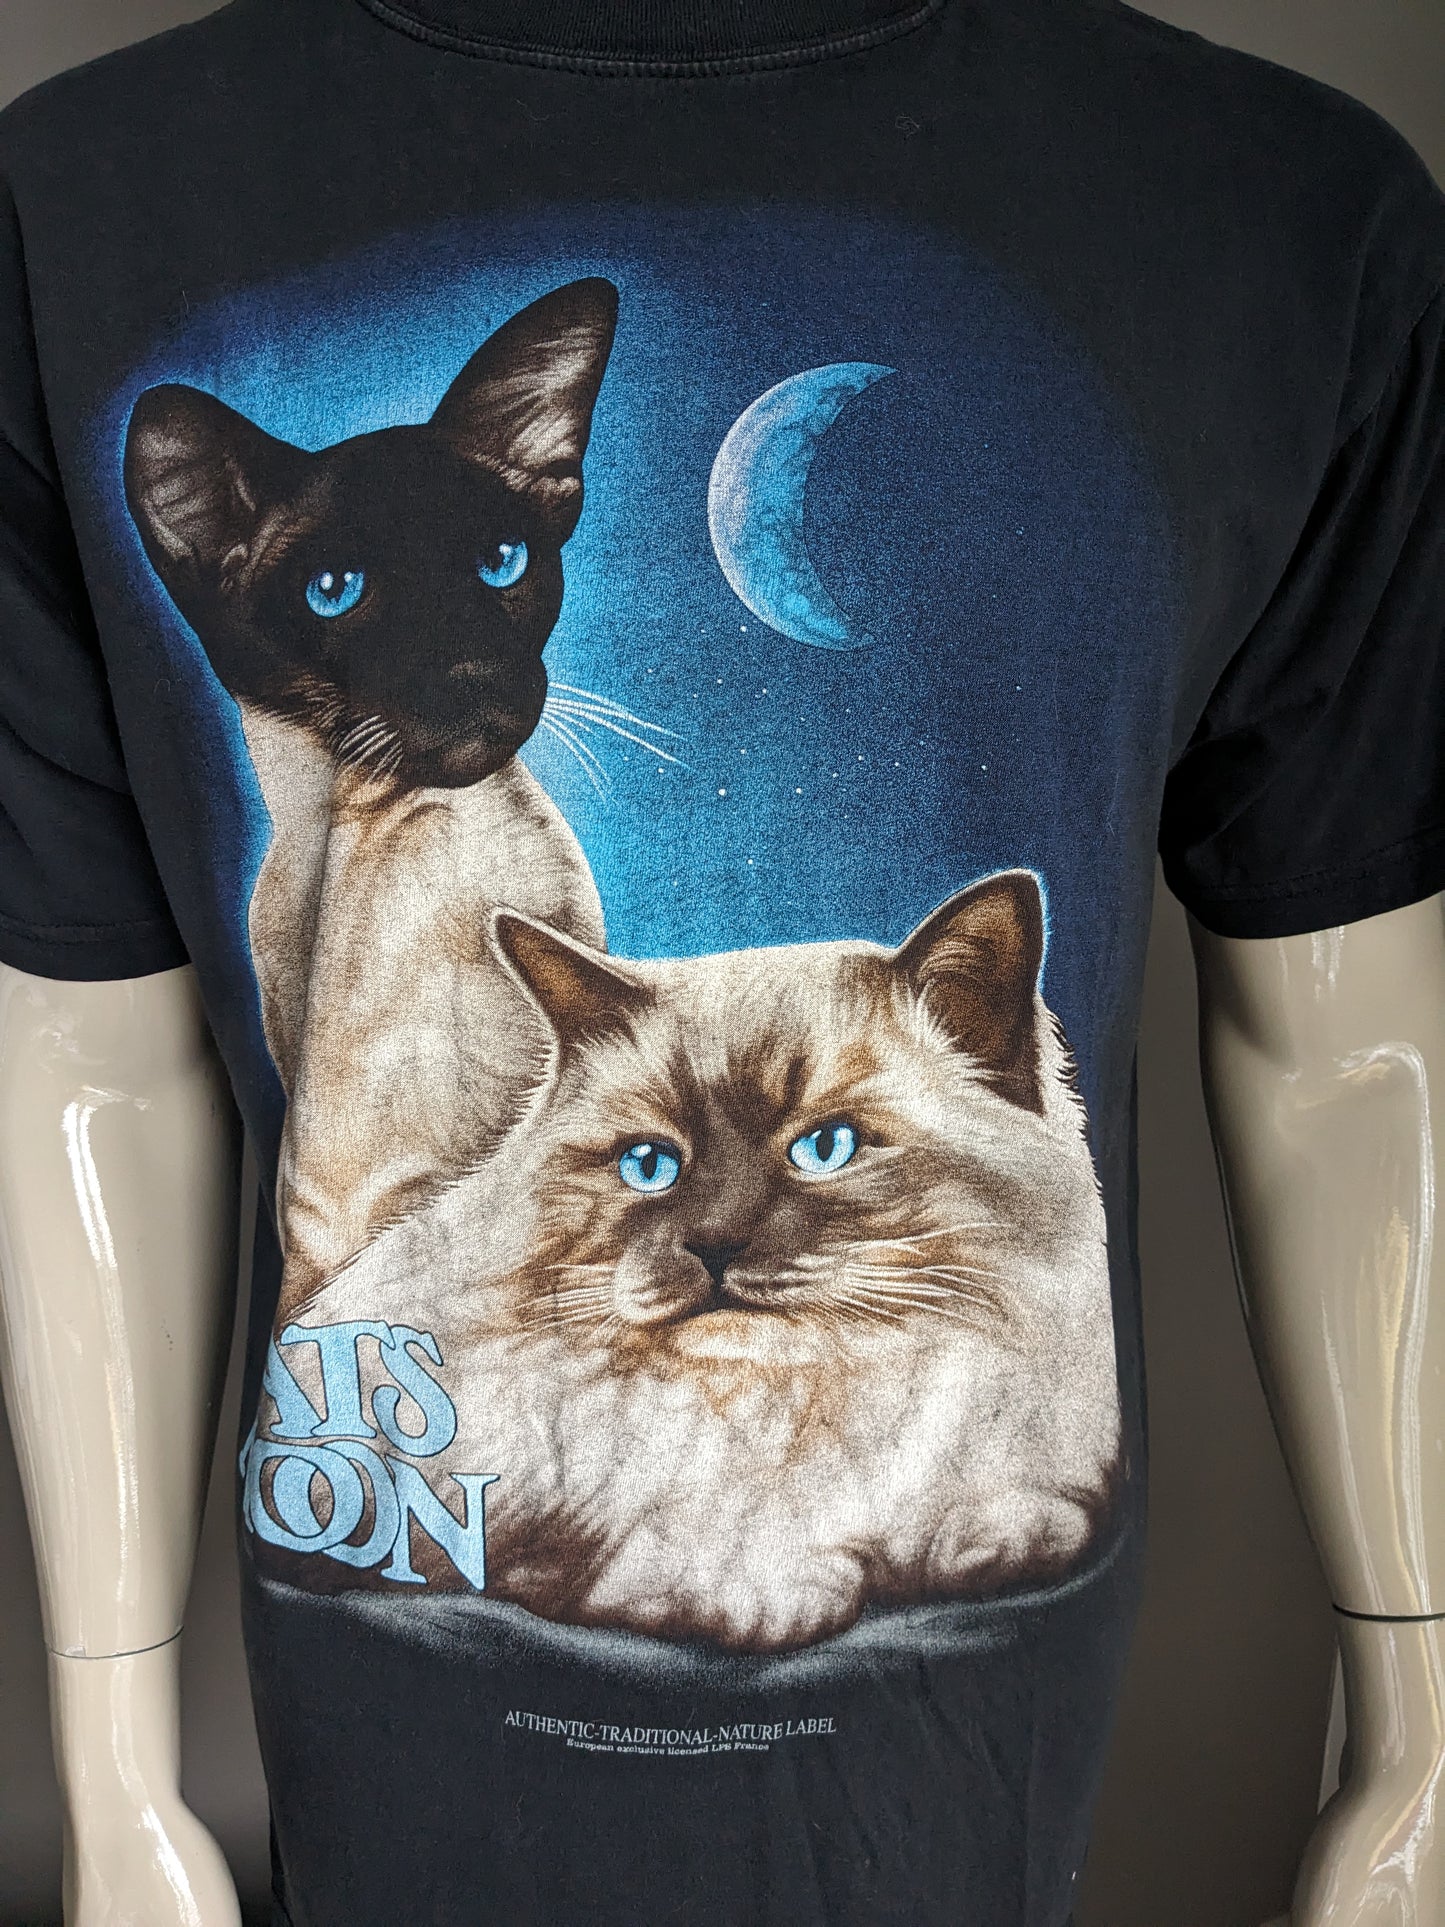 RL Collection shirt. "Cats Moon". Black with print. Size L.